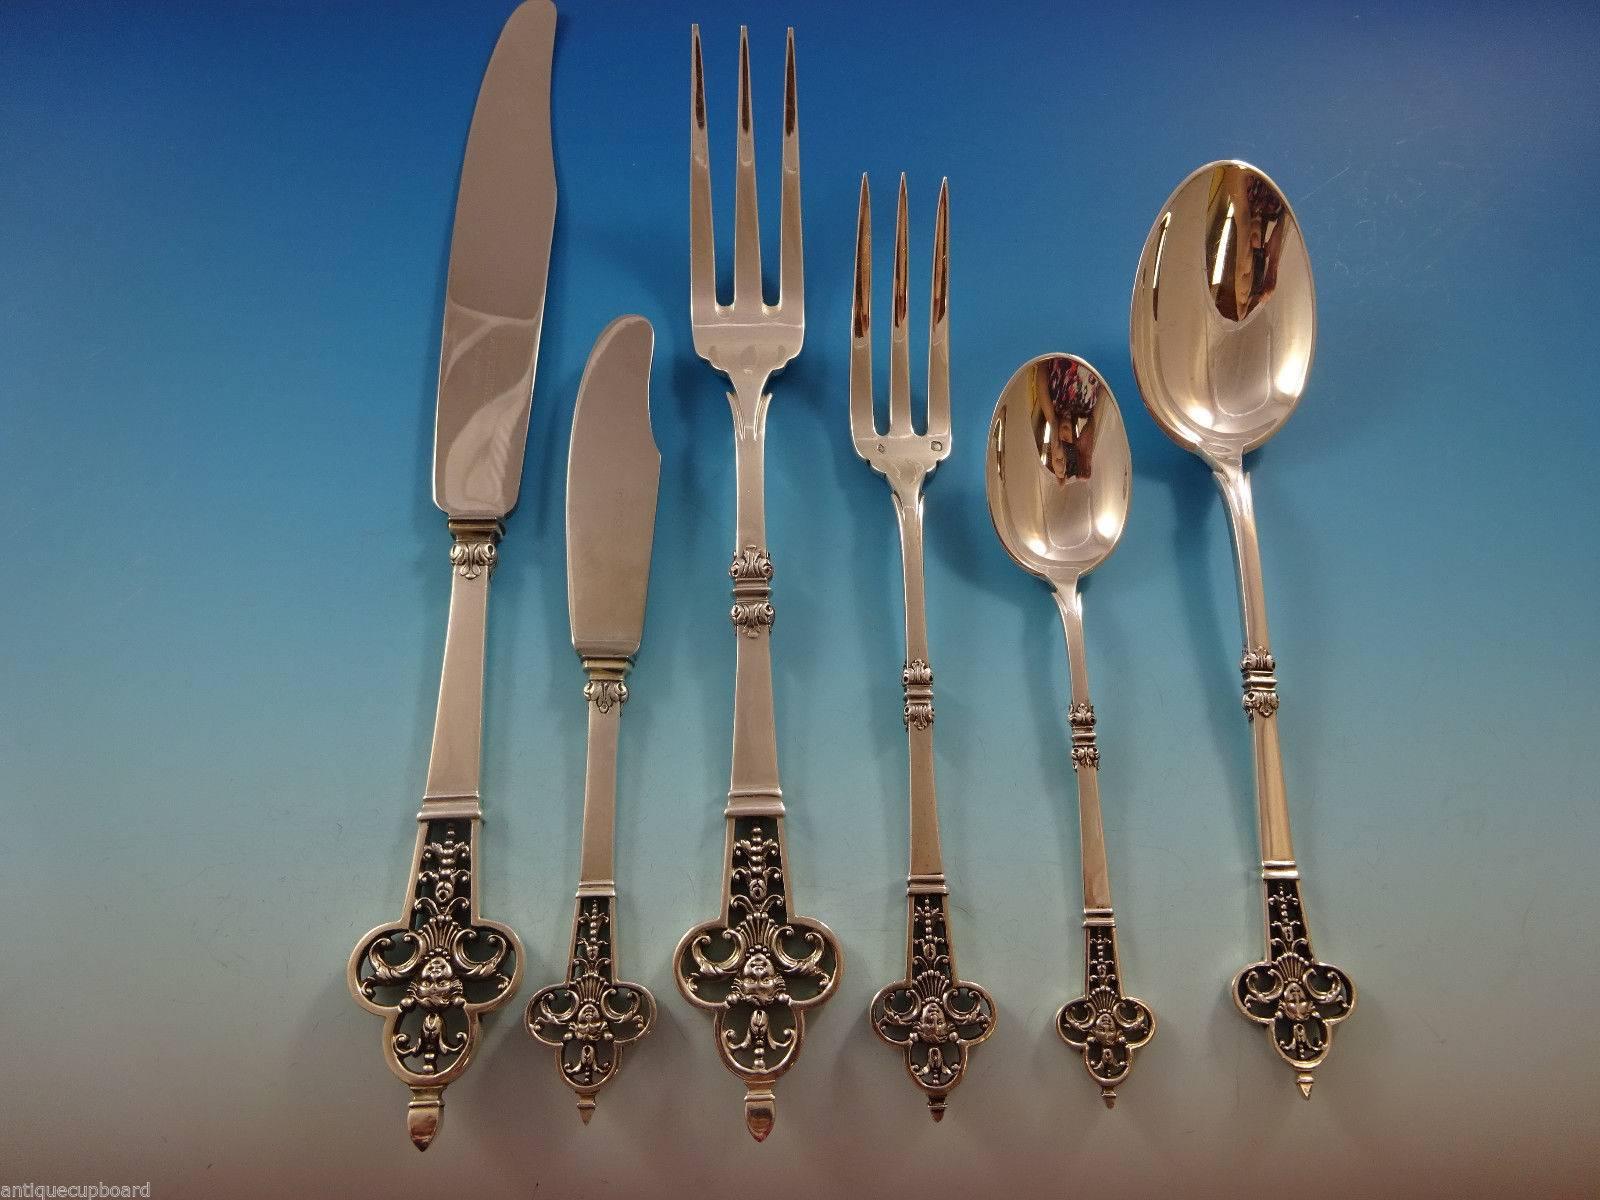 CHRISTOFLE STERLING SET

This exquisite flatware pattern was inspired by the Renaissance style with its 
trilobite and pierced tip, embellished with a putti head and decorated 
with leaves.  It is entirely handmade in the Christofle Haute